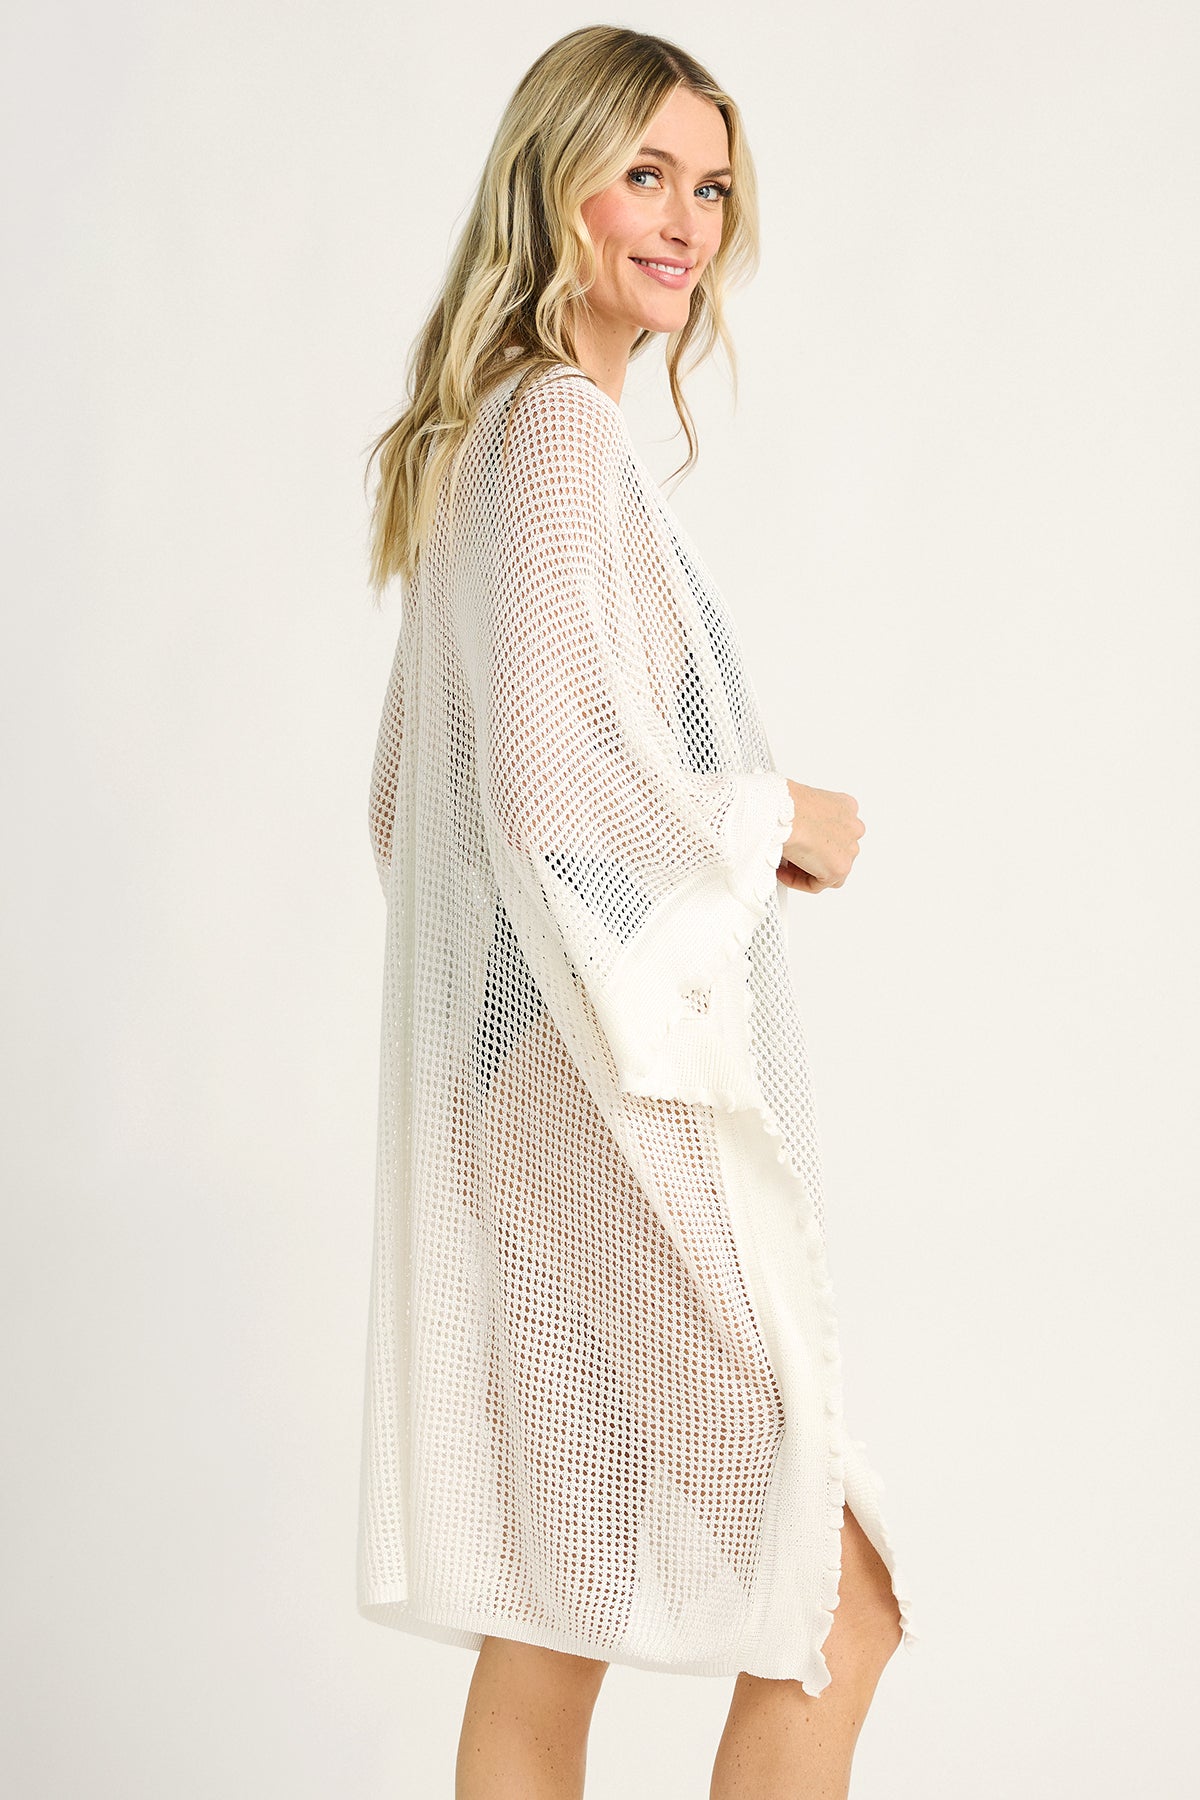 Surf Gypsy Knit Mesh Coverup